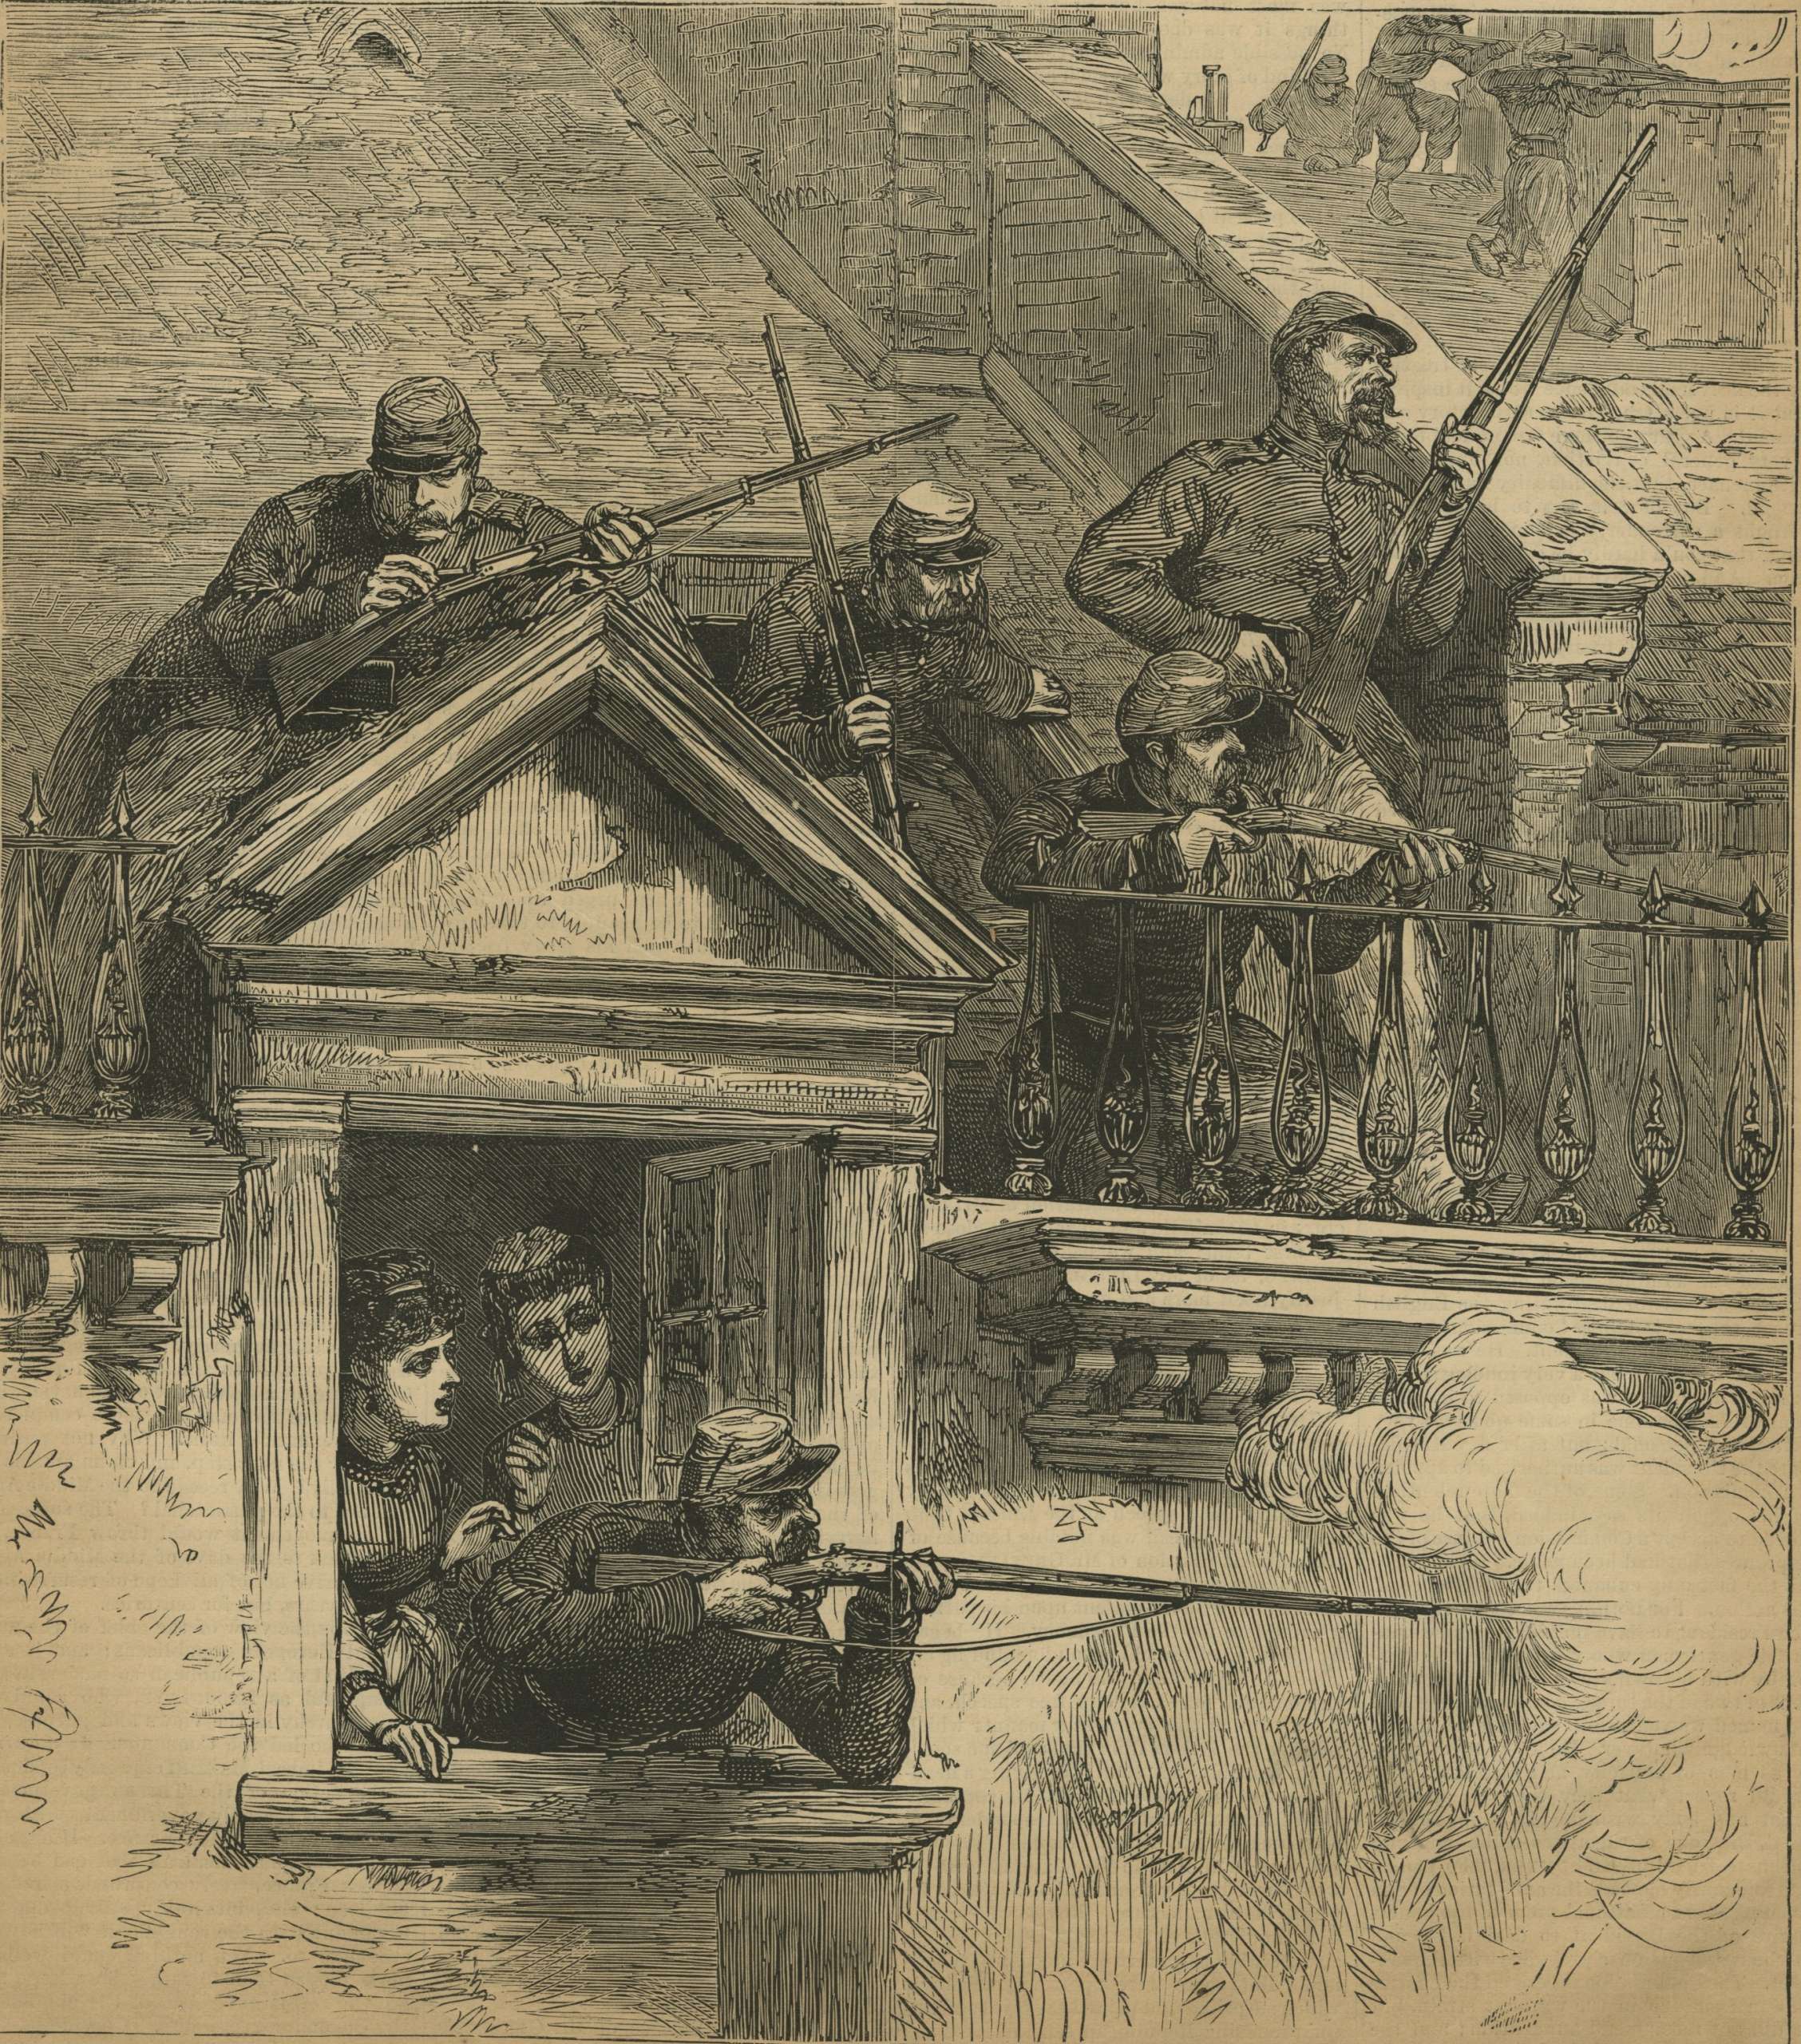 Versailles soldiers firing upon the communists from roofs and windows in Paris. Harper's Weekly: July 1, 1871